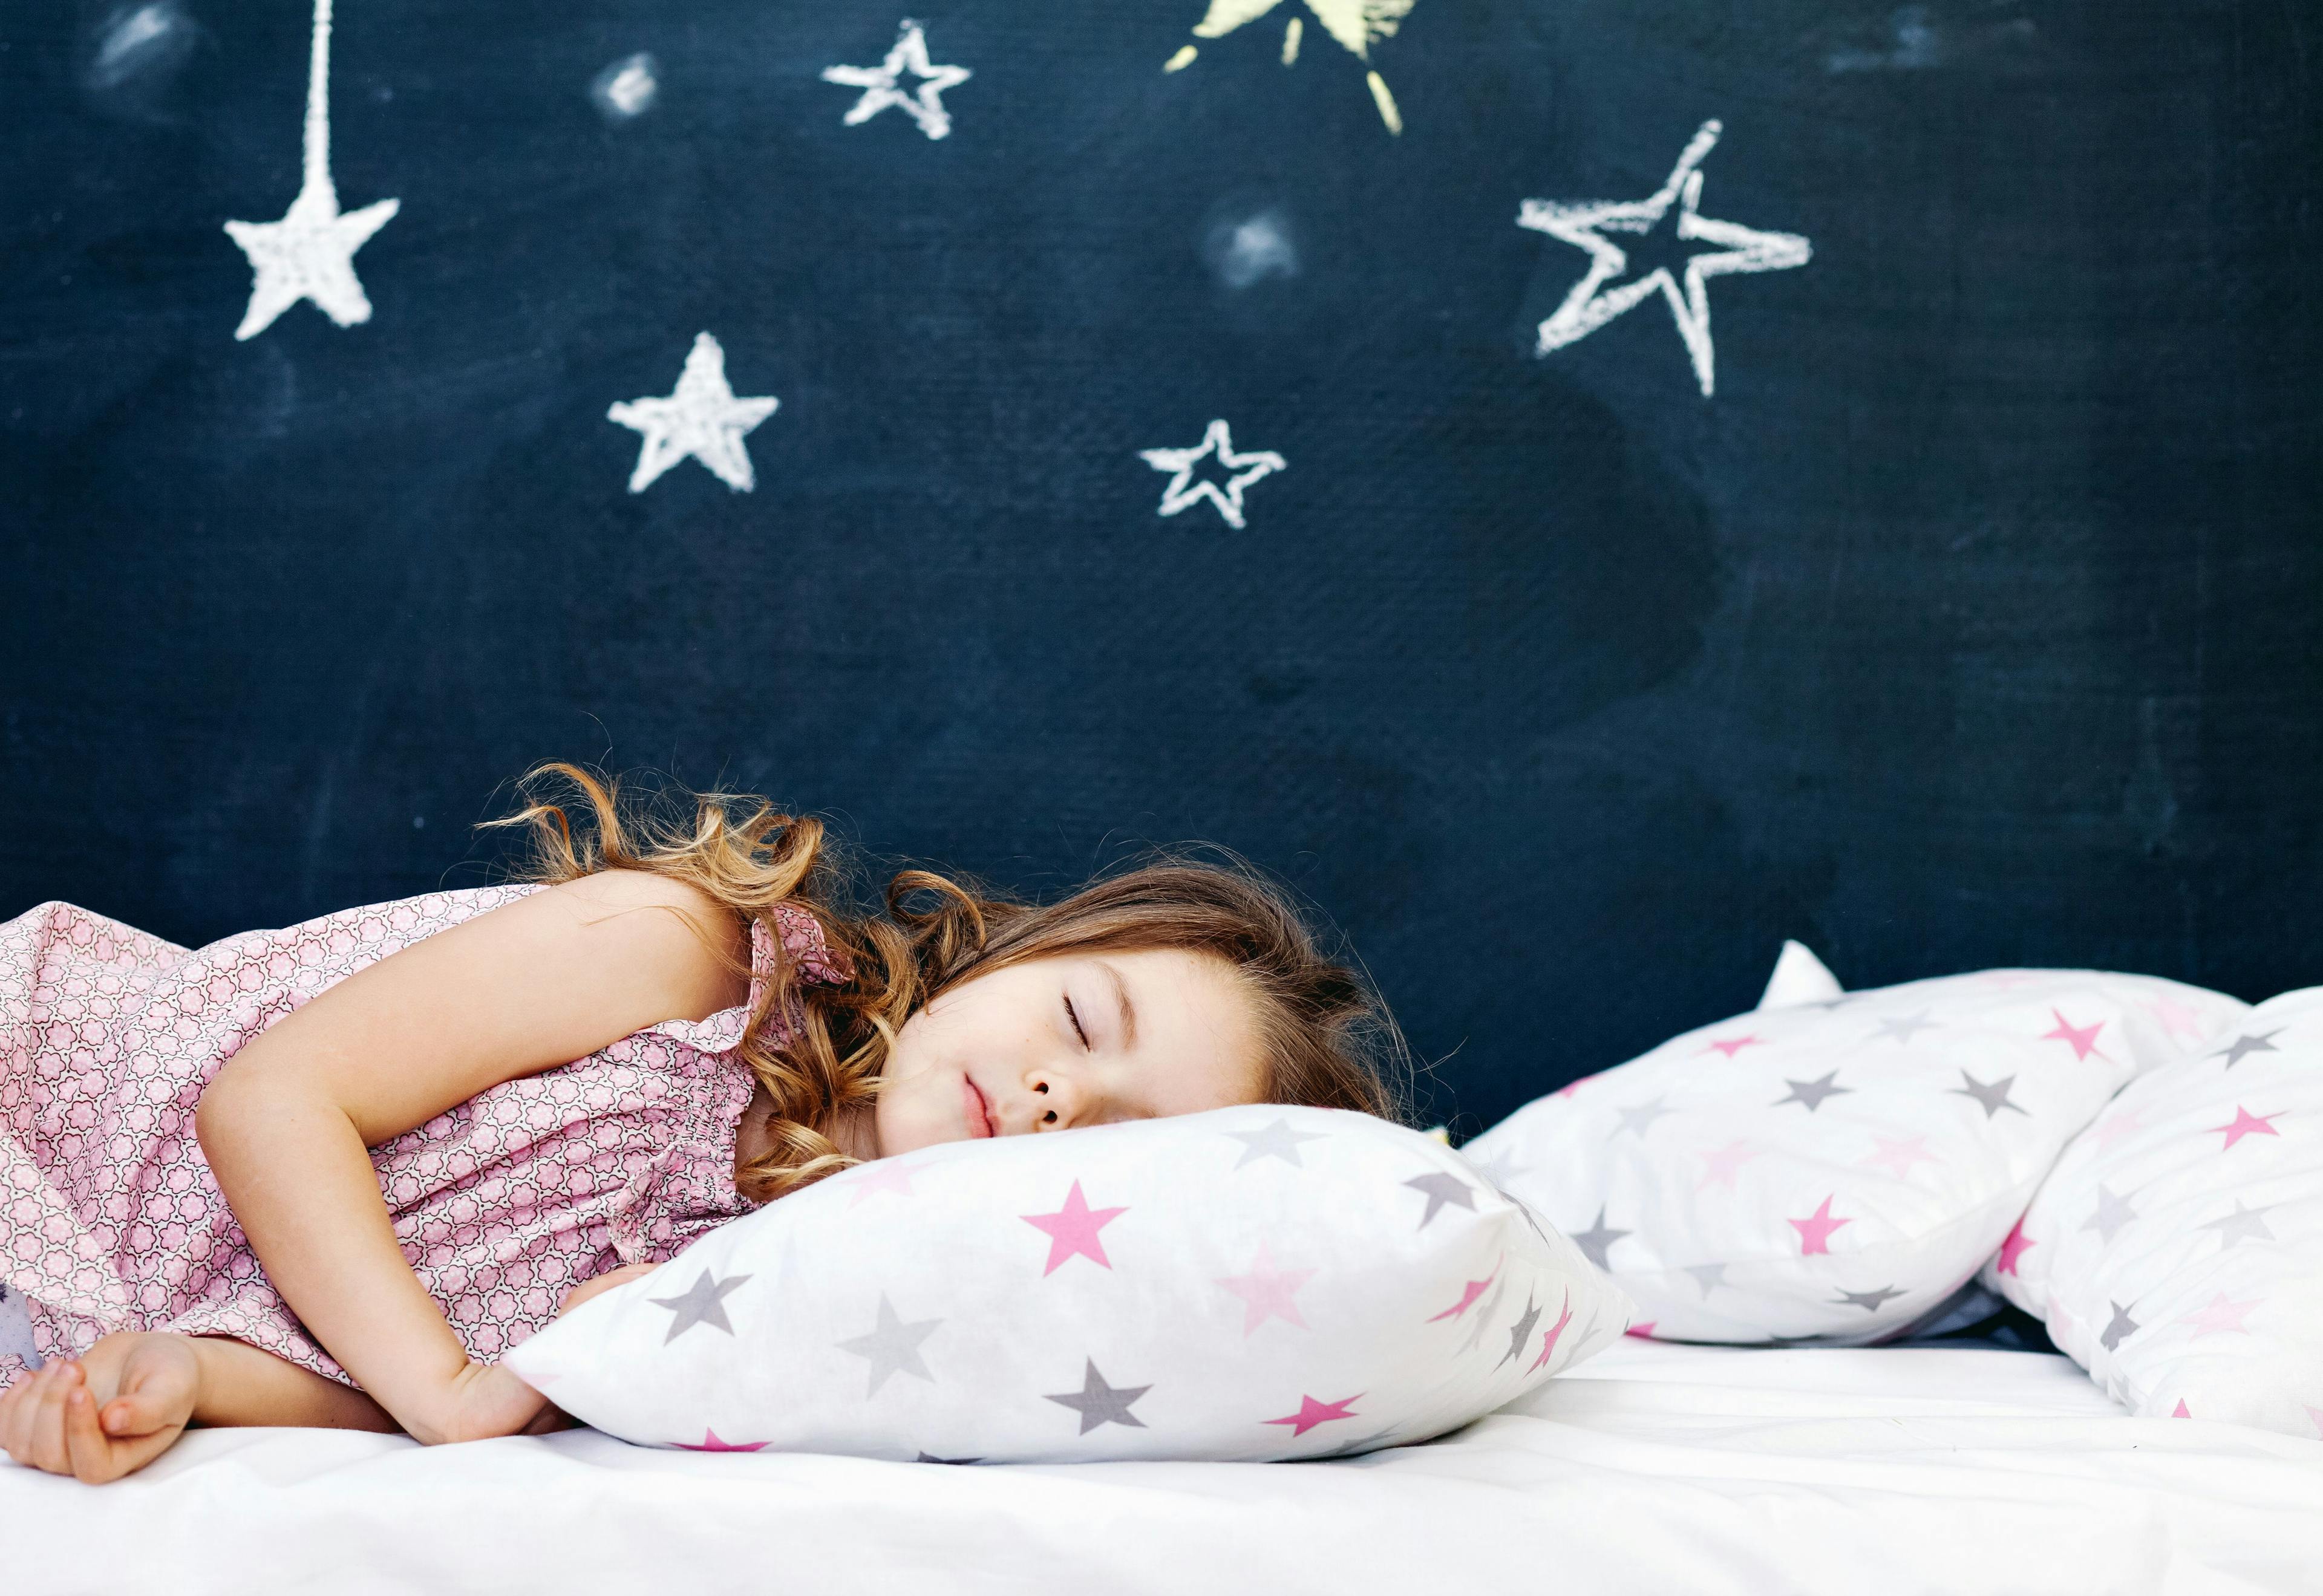 Sleep quality improvement in children treated with dupilumab for atopic dermatitis